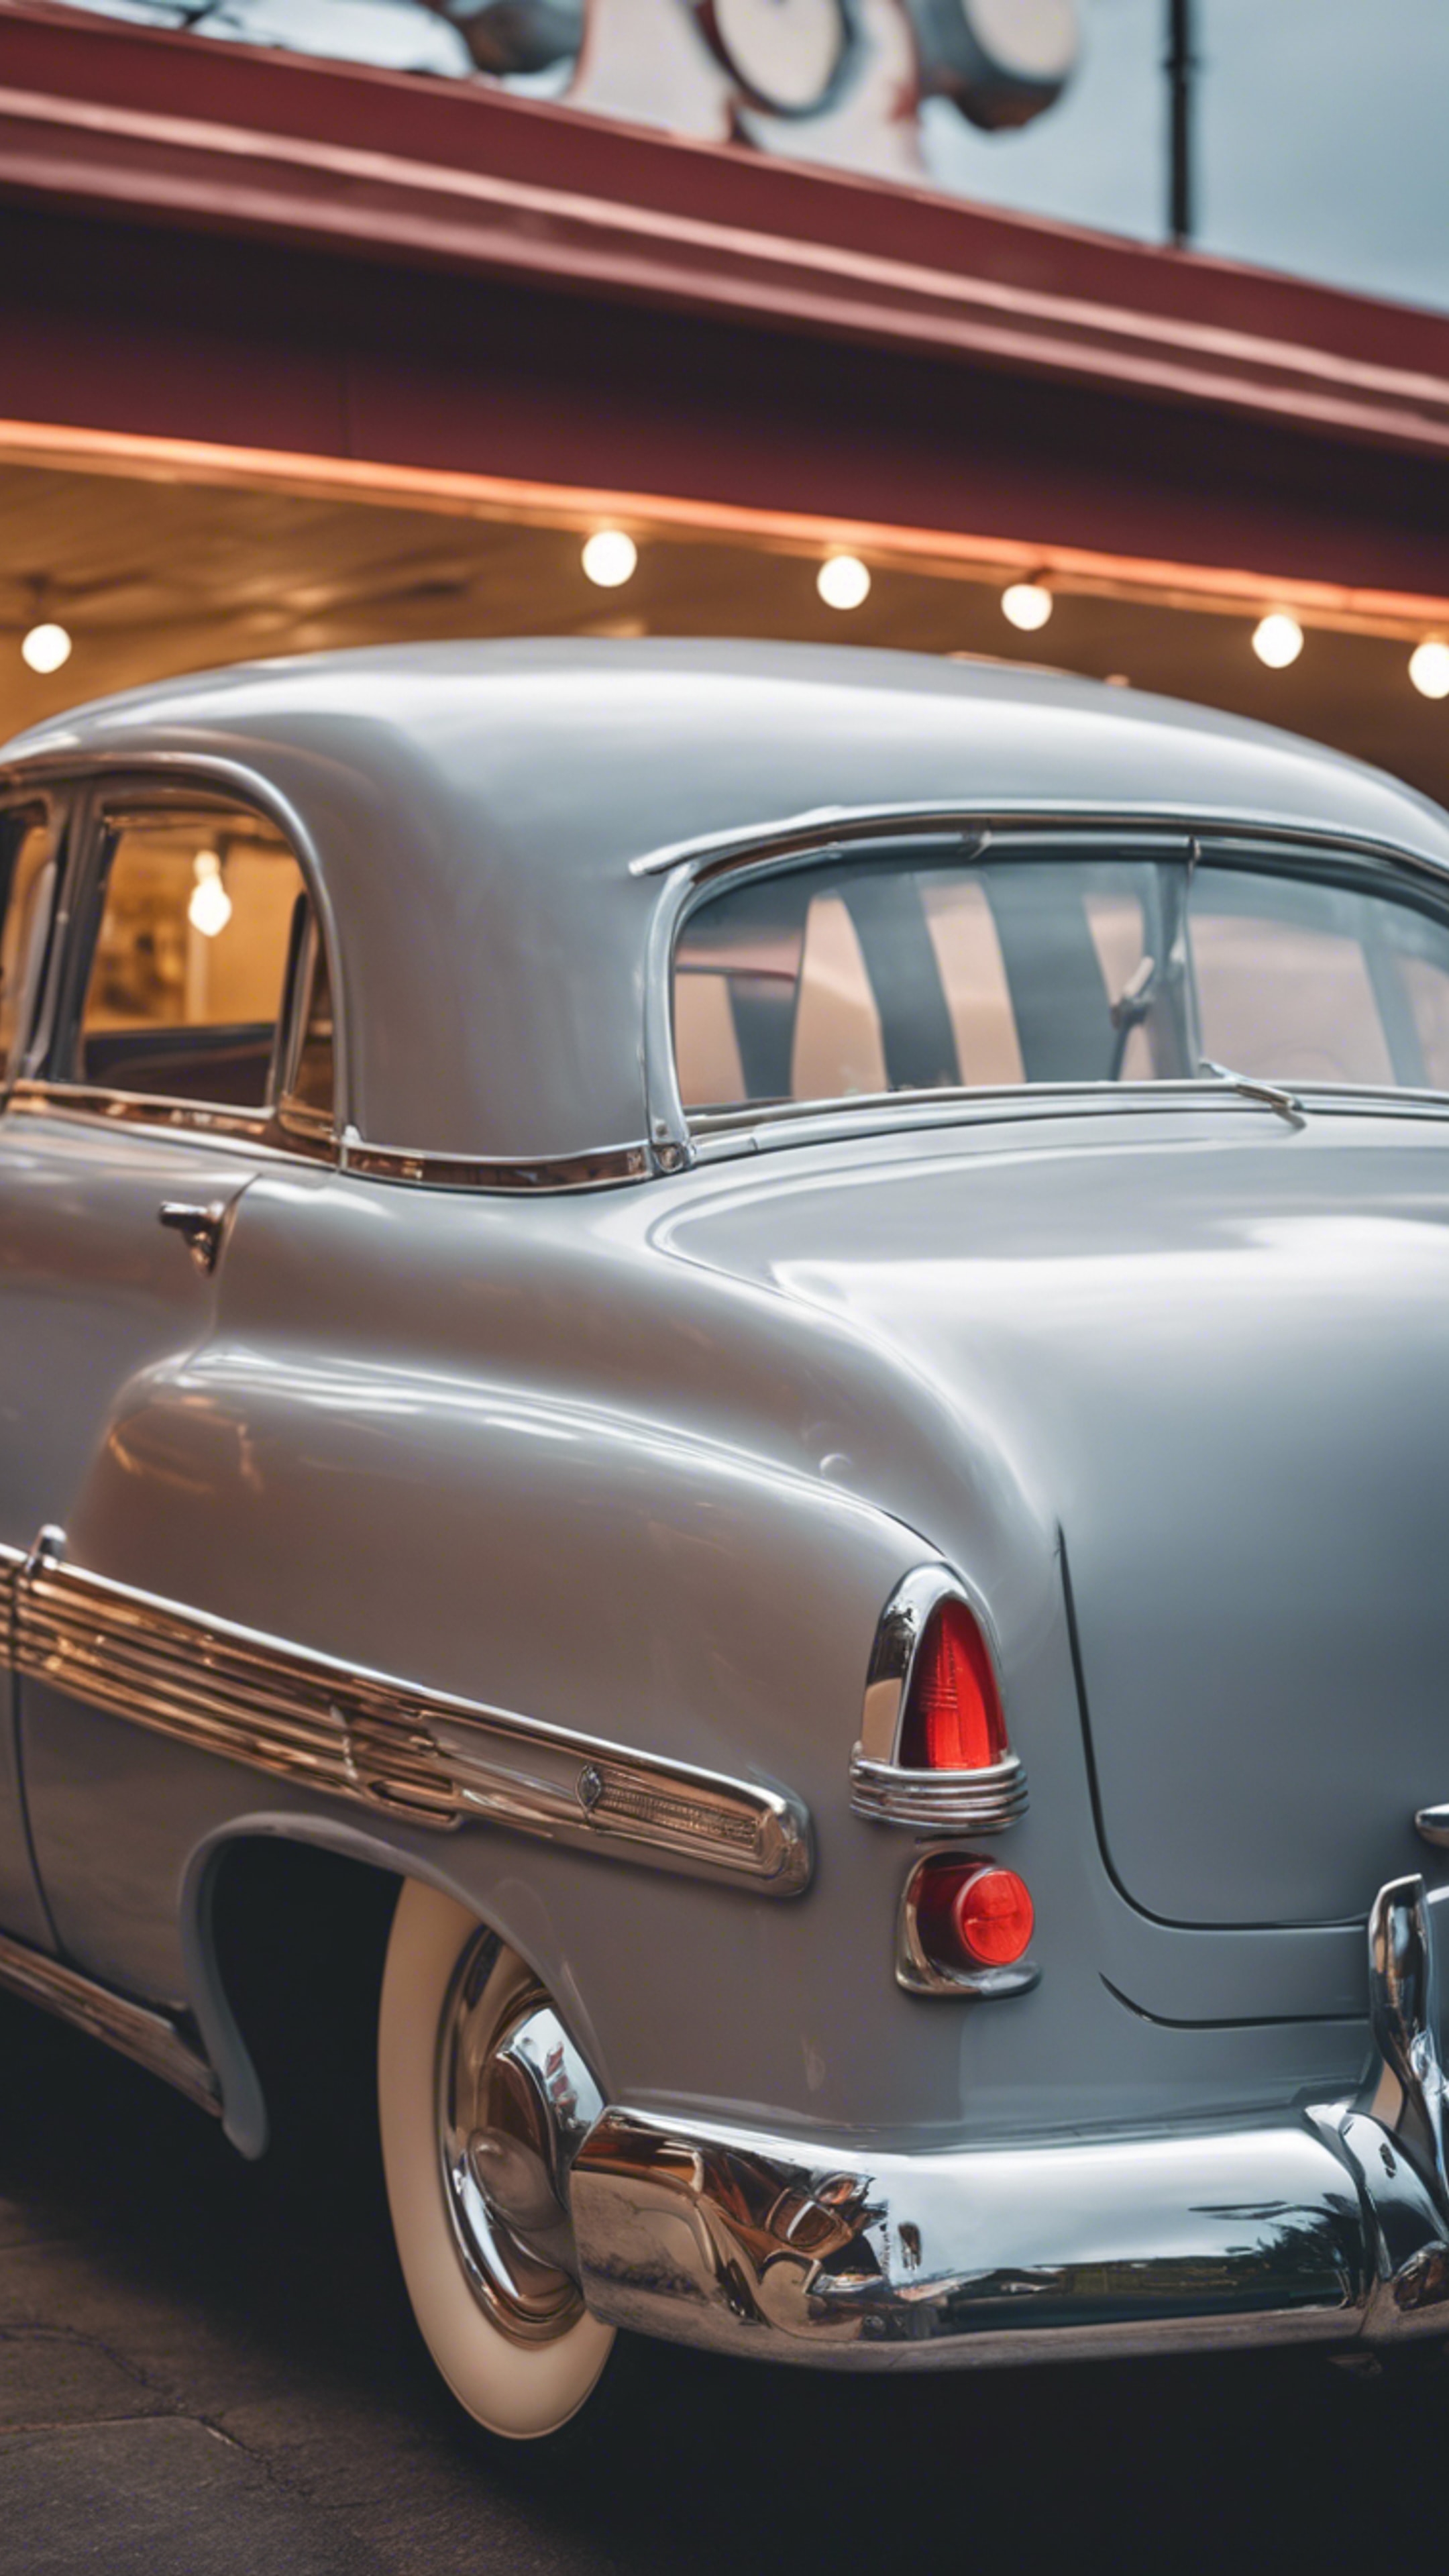 A vintage 1950s car, painted in light gray, parked outside a quirky roadside diner. 牆紙[6f1ad1f93eb7446a85d1]